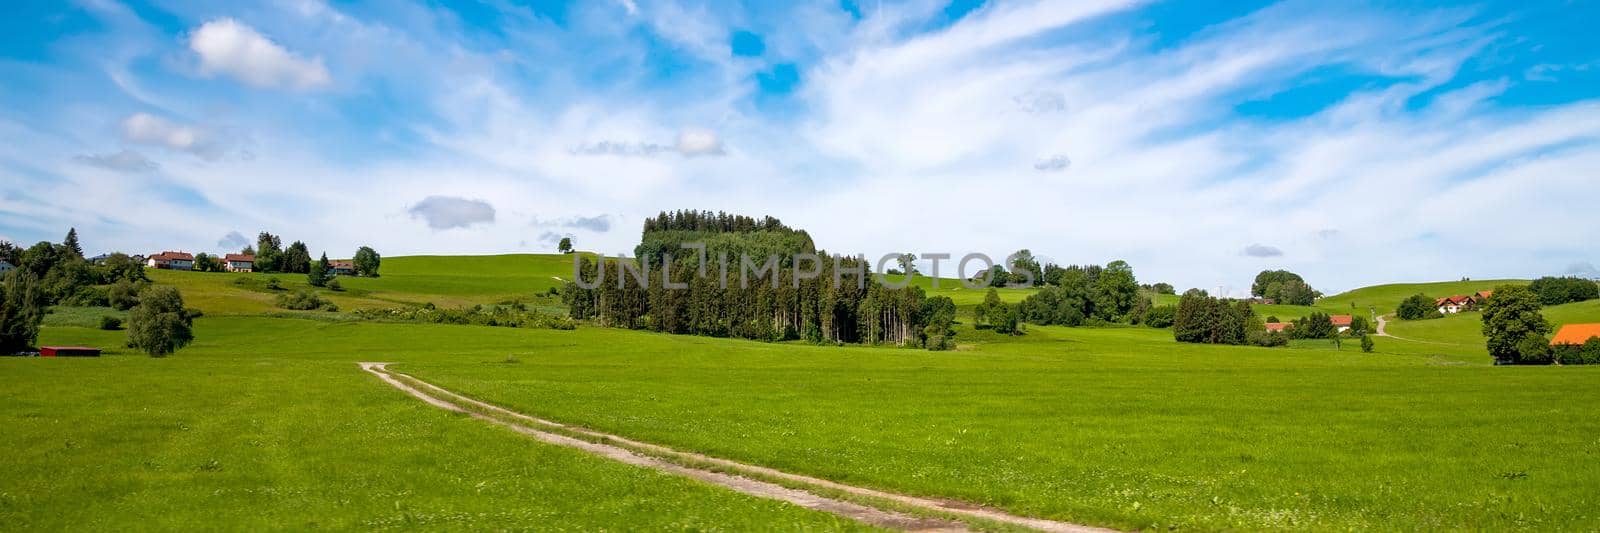 Panoramic view of green countryside and country road by EdVal